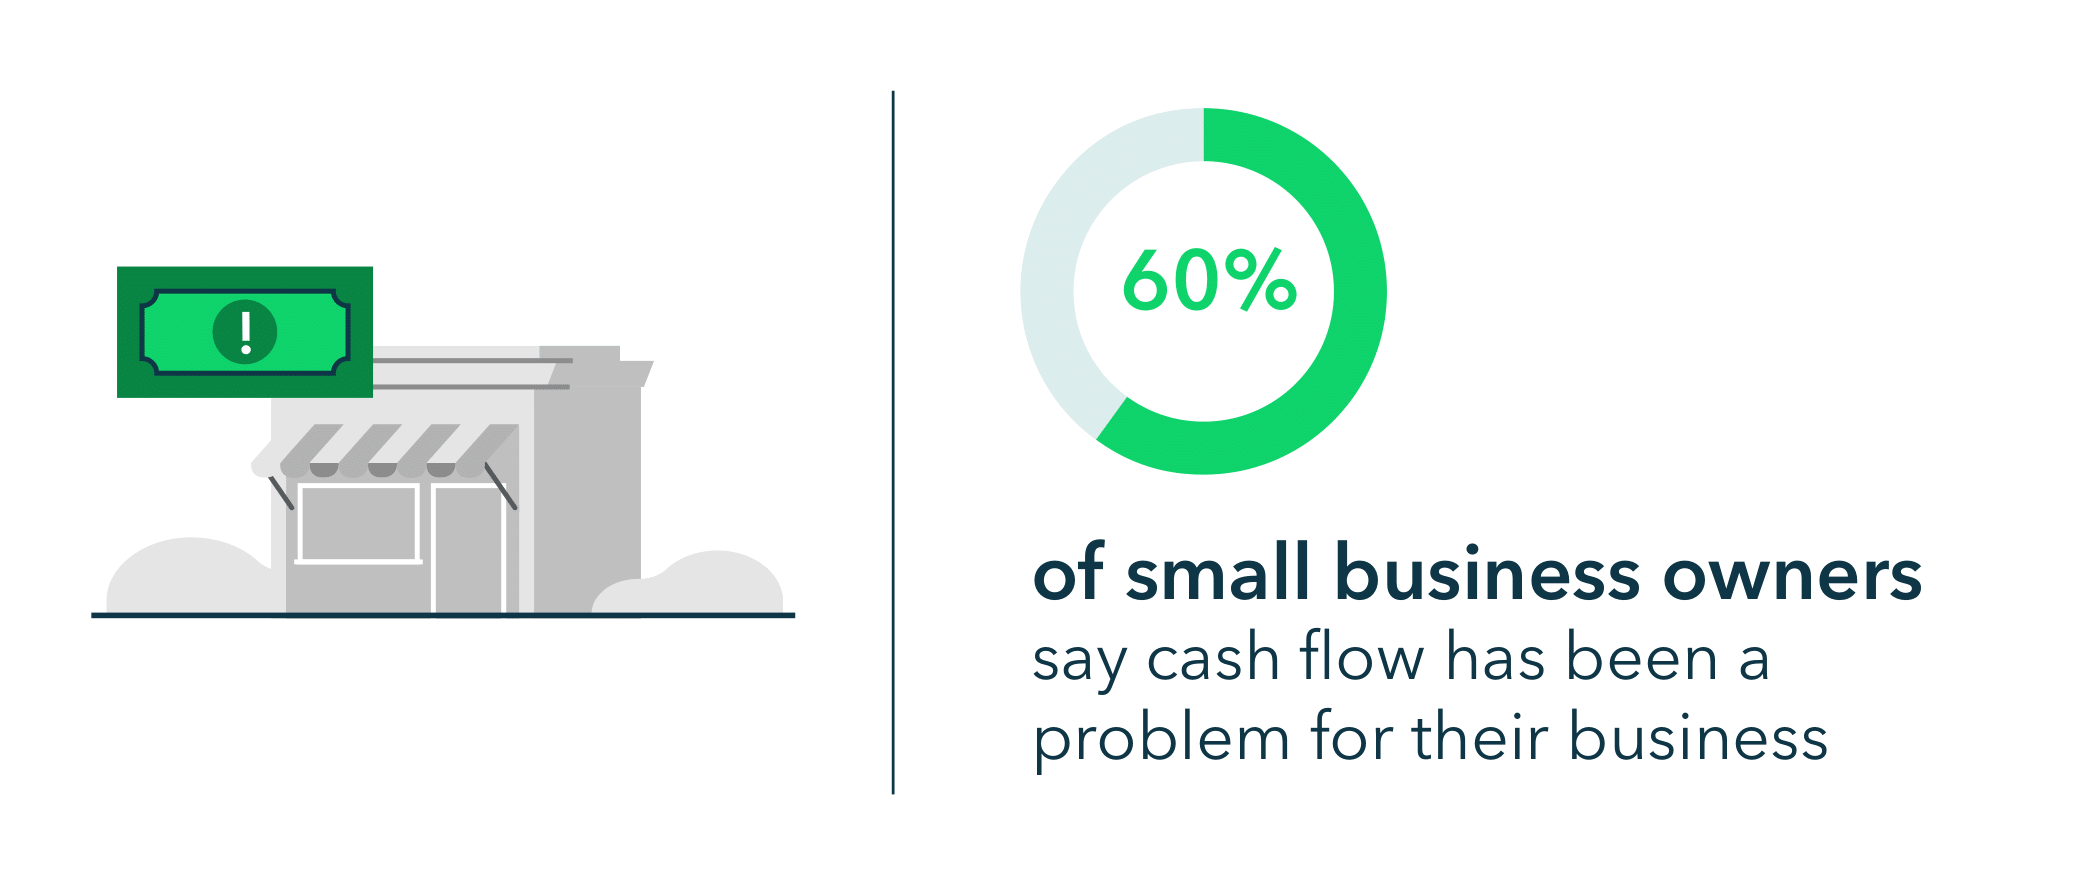 60% of small business owners with cash flow problems said they came as a surprise.